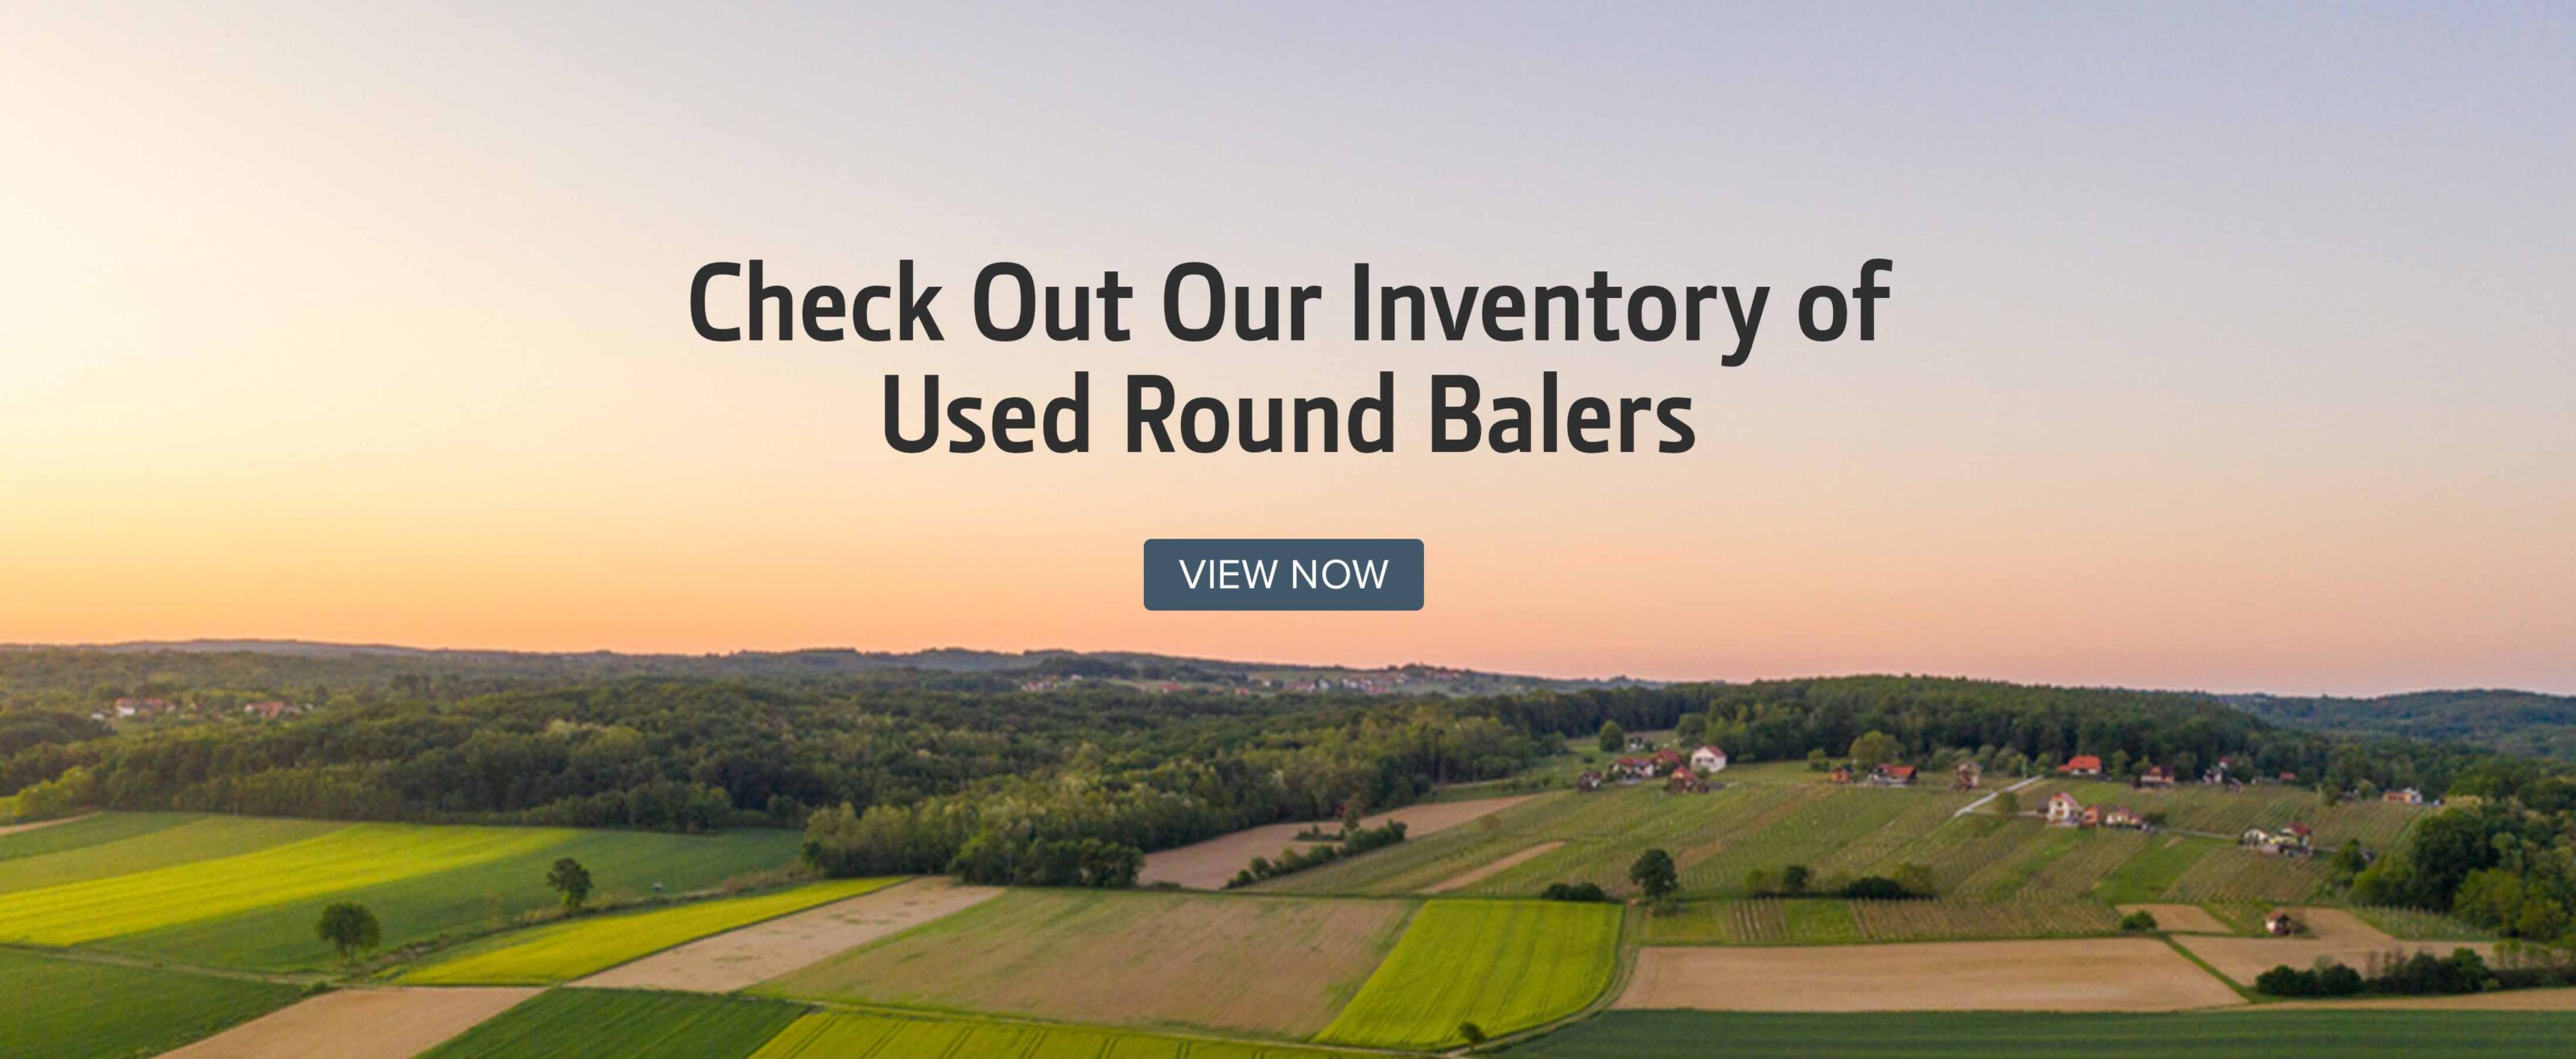 Check Out Out Inventory of Used Round Balers